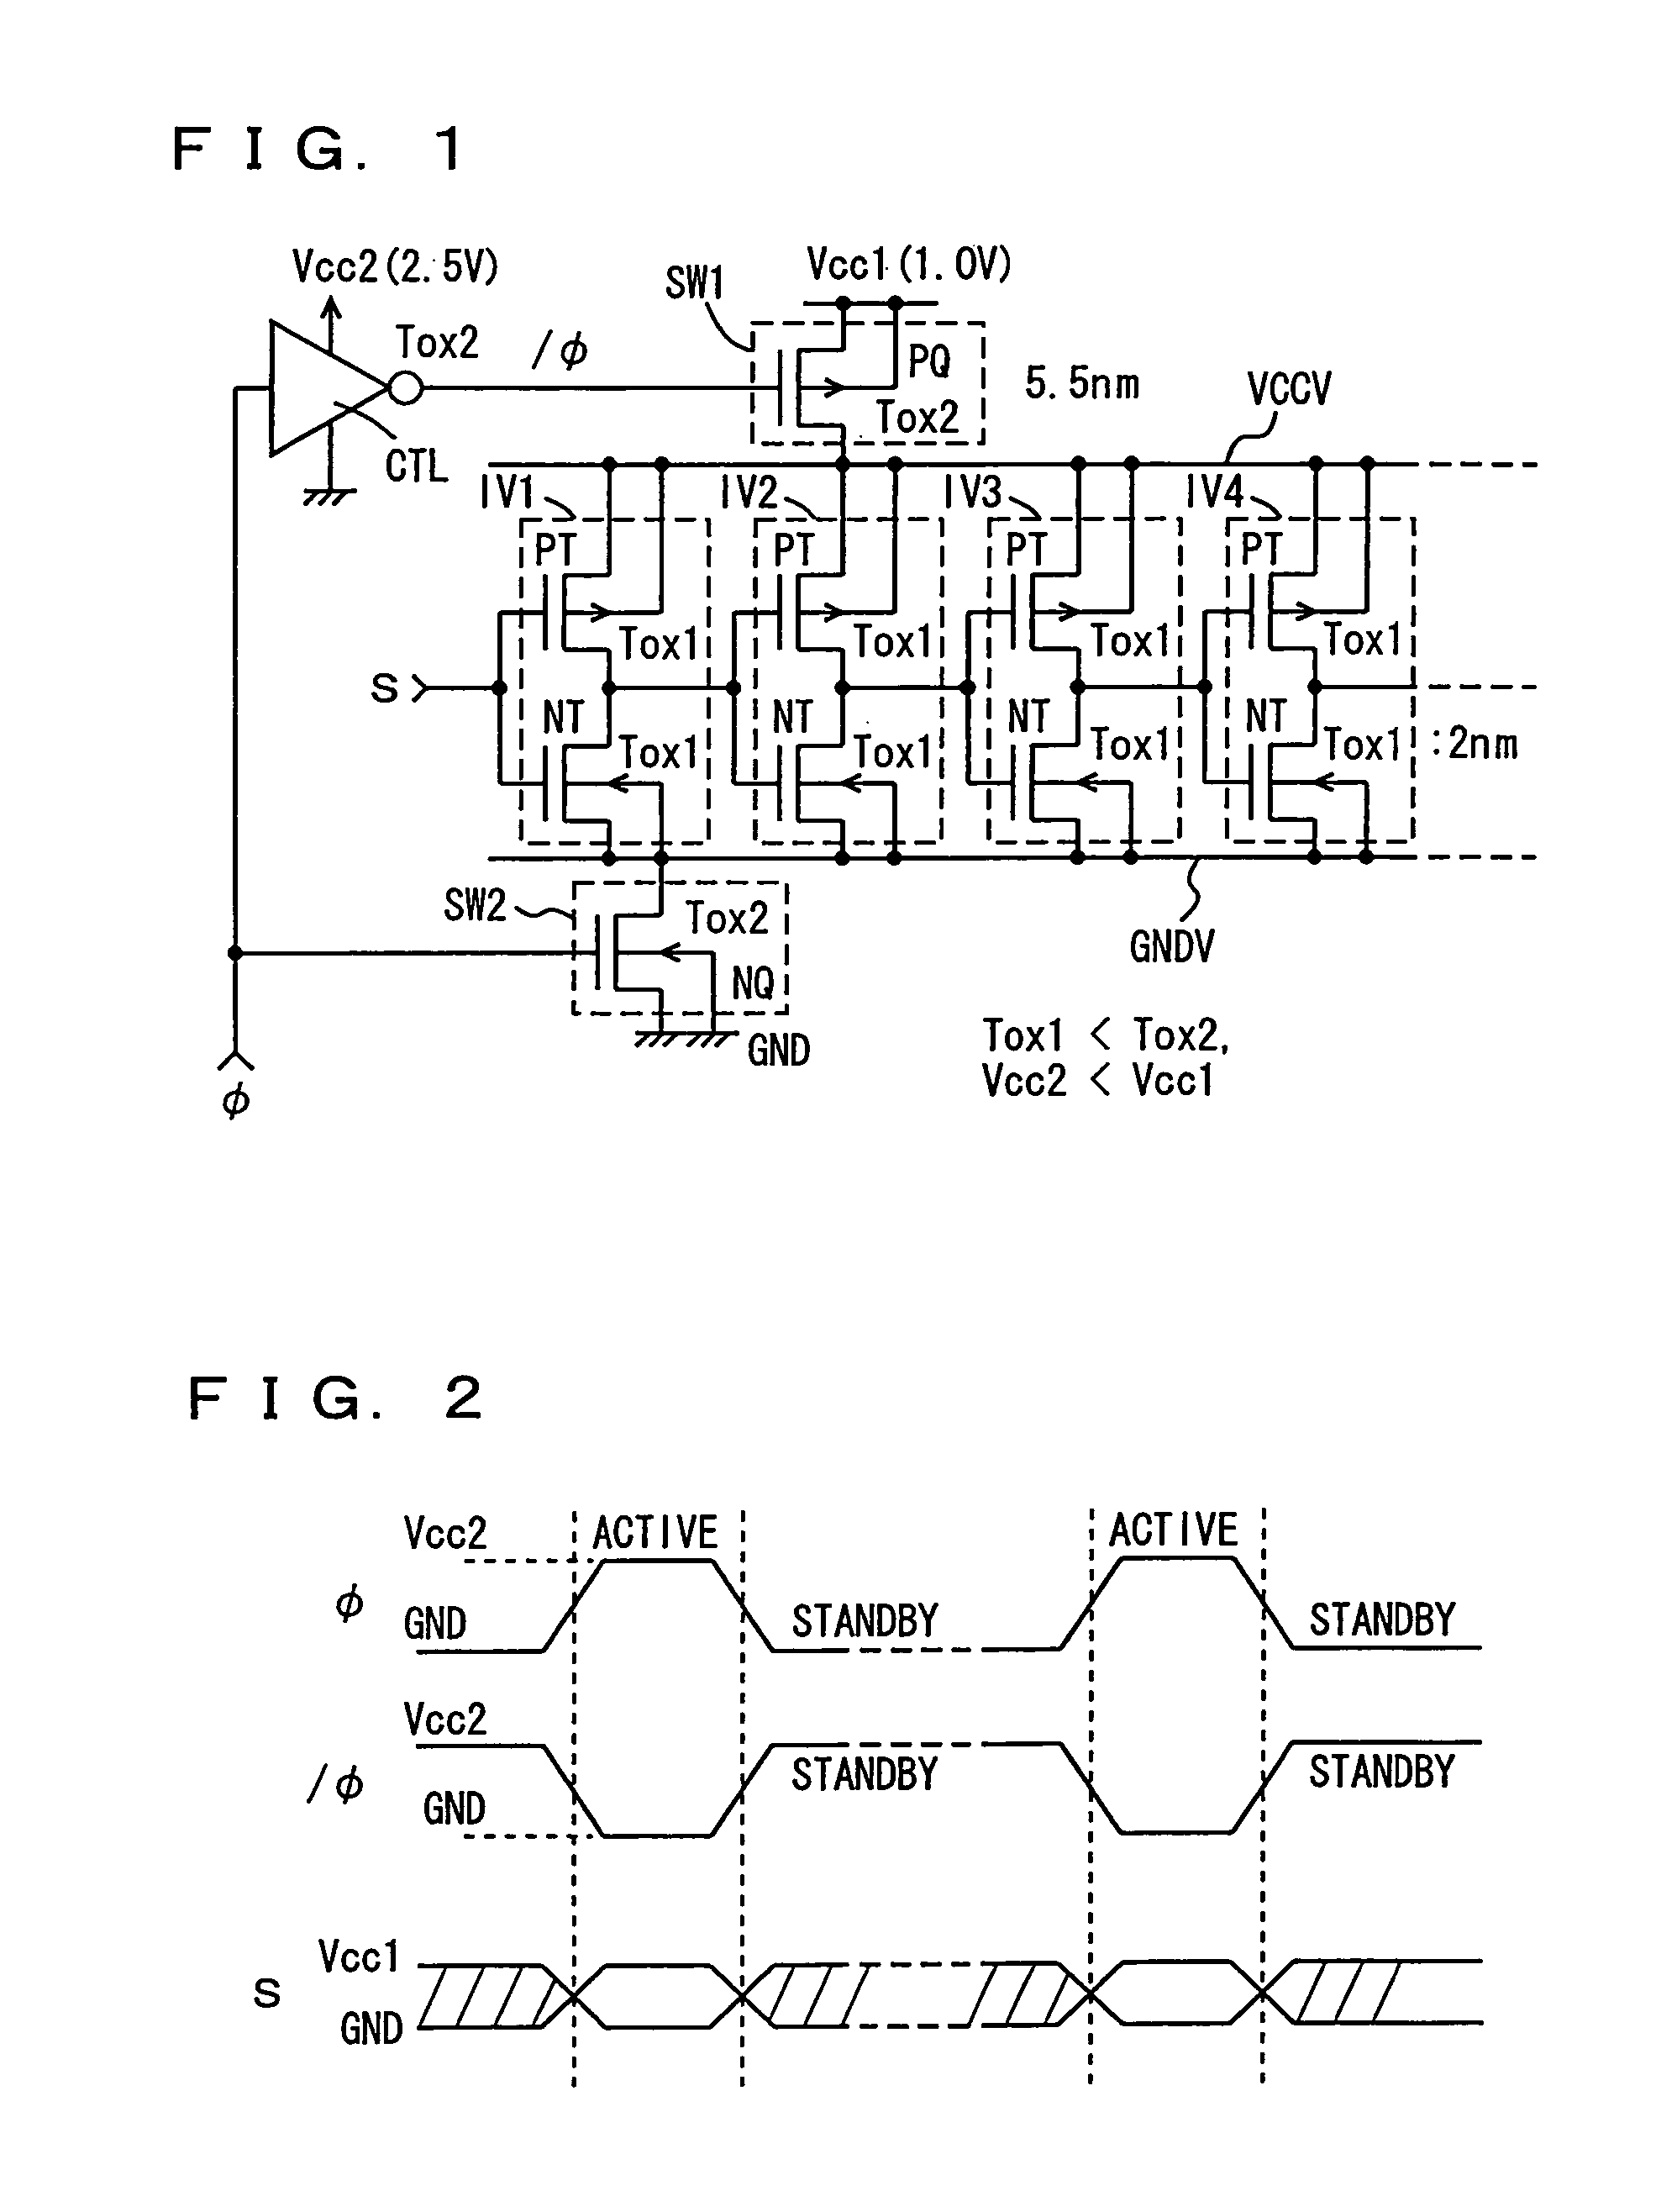 Low power consumption MIS semiconductor device